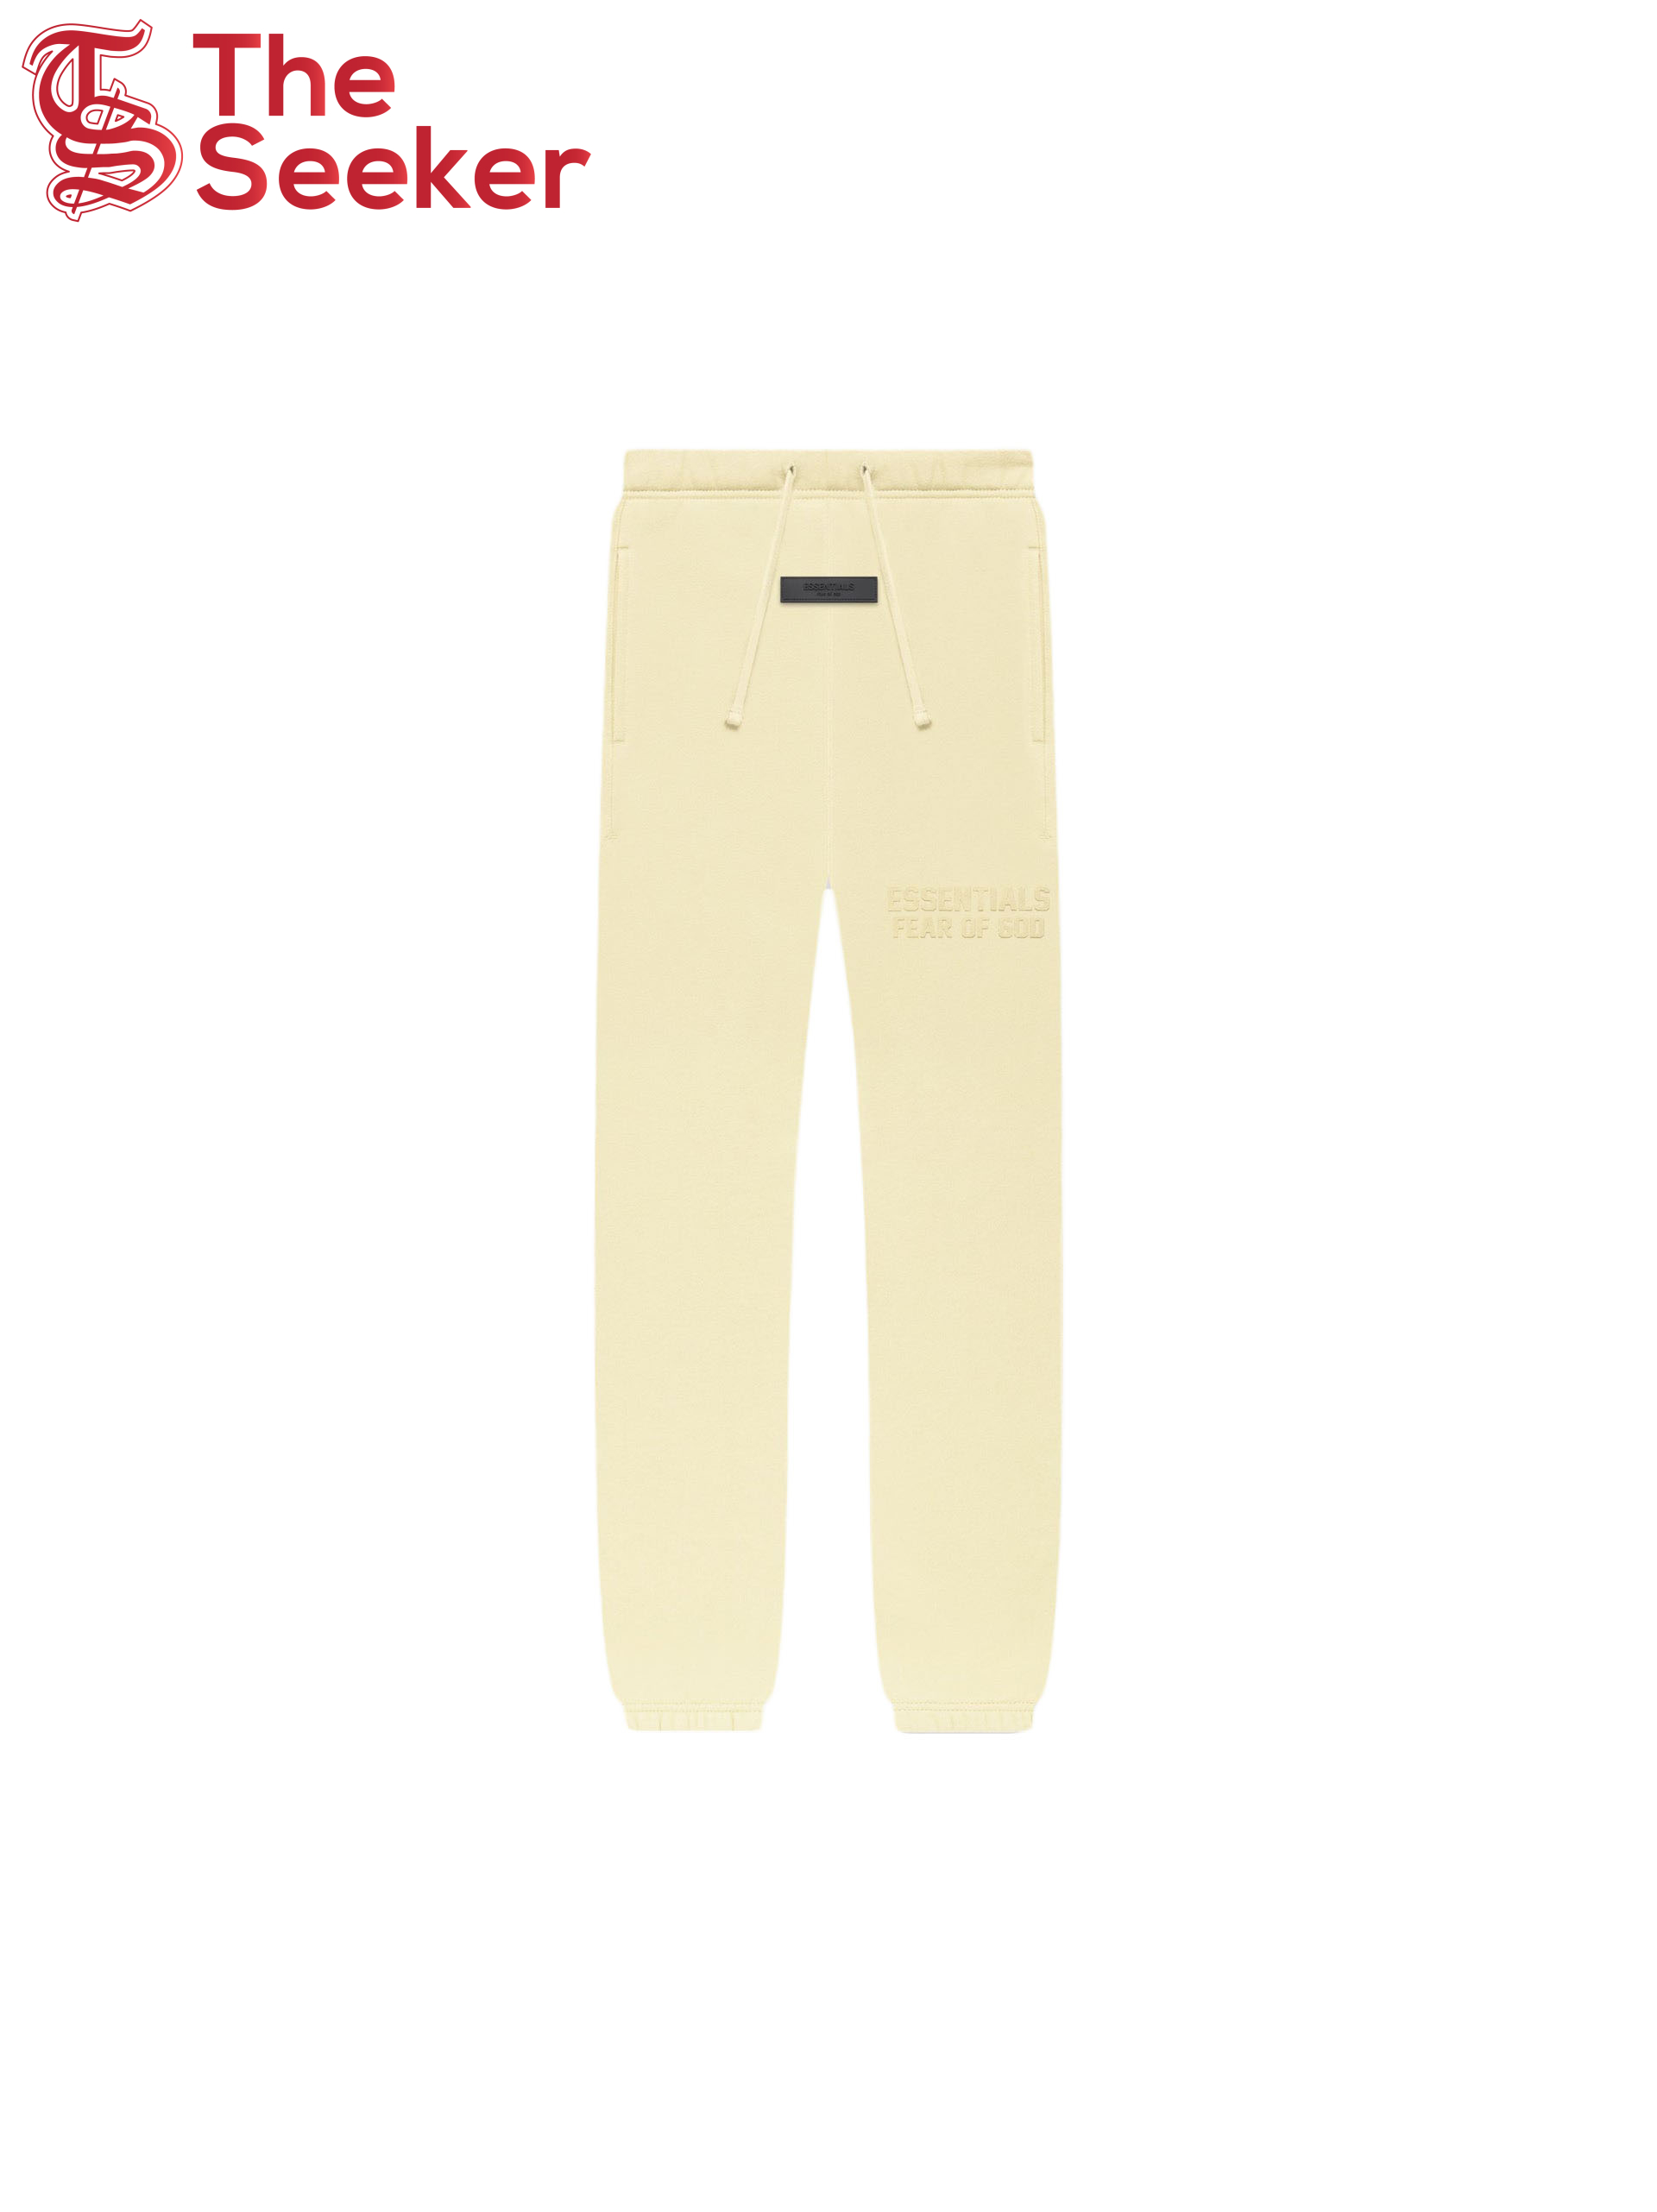 Fear of God Essentials Kid's Essentials Sweatpant Canary